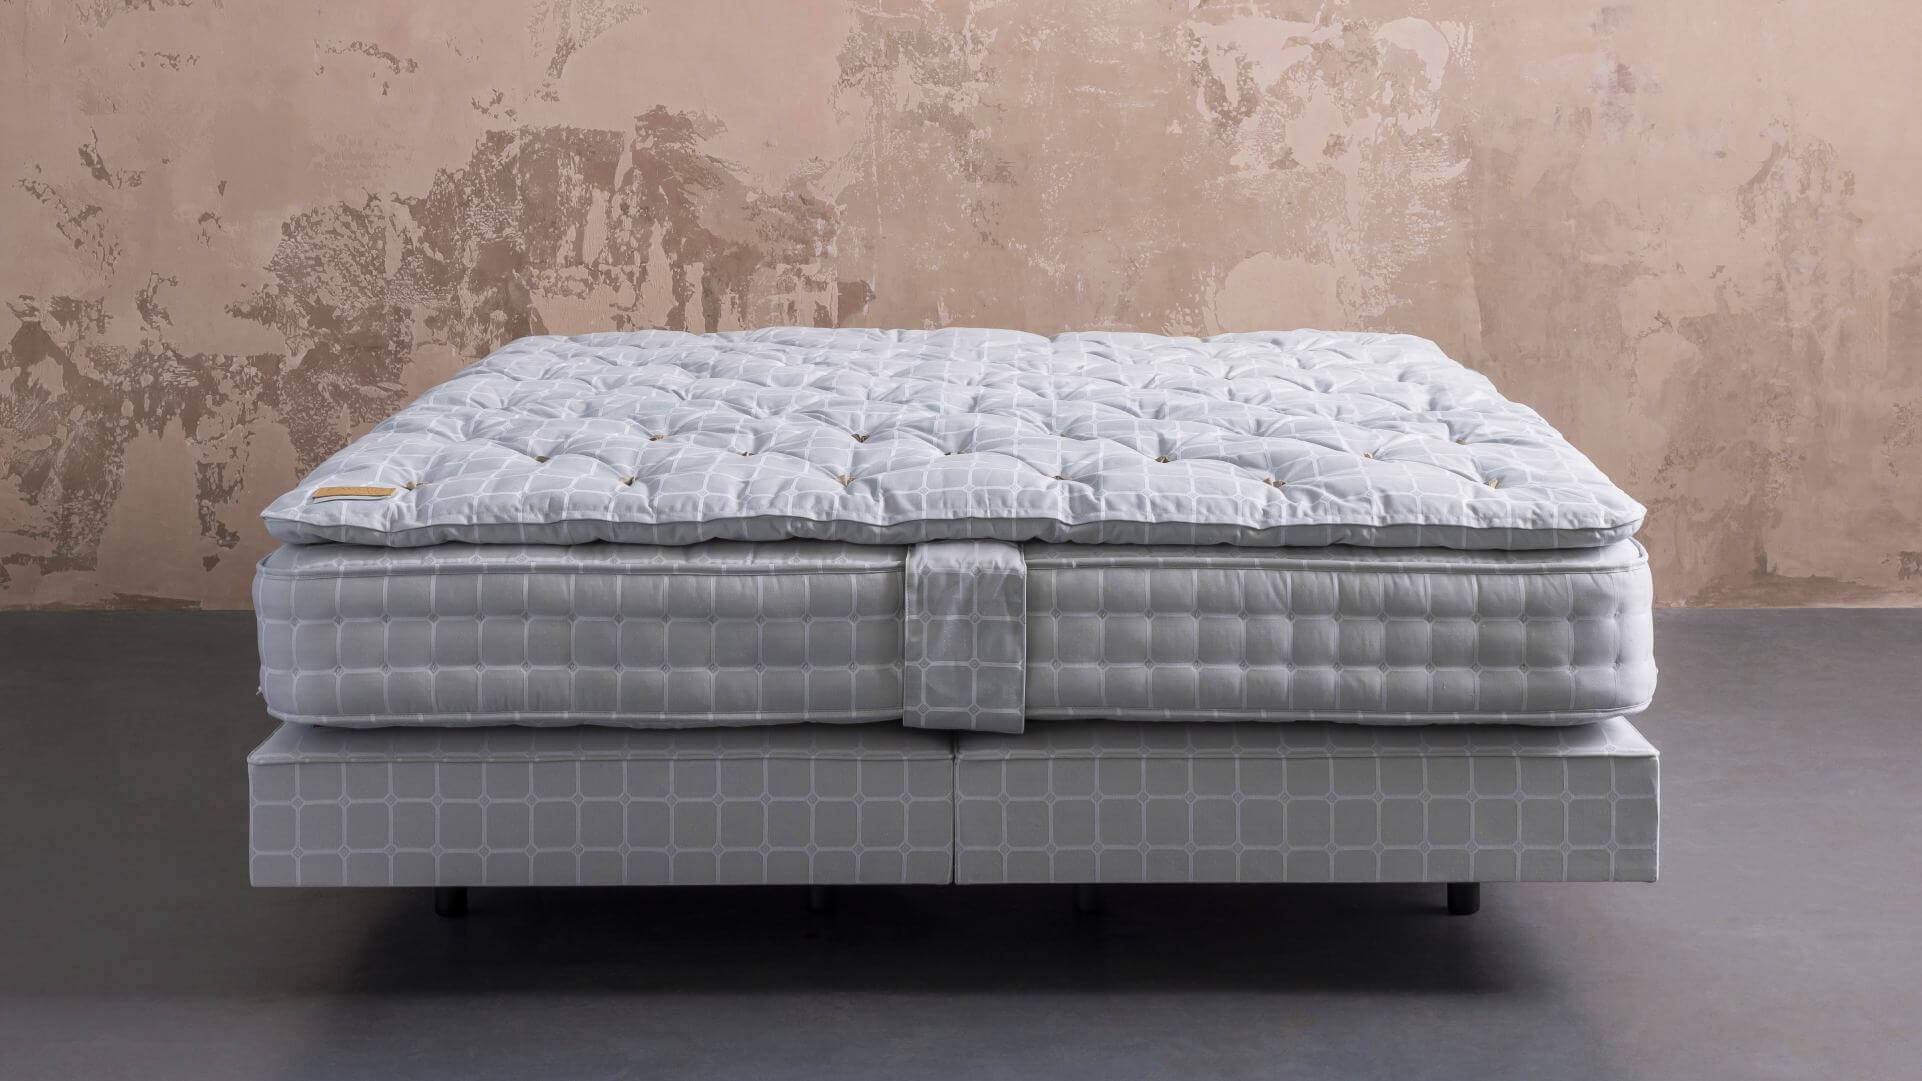 Savoir No5 bed featuring the CW topper, No5 mattress and base, all upholstered in signature blue ticking pattern.